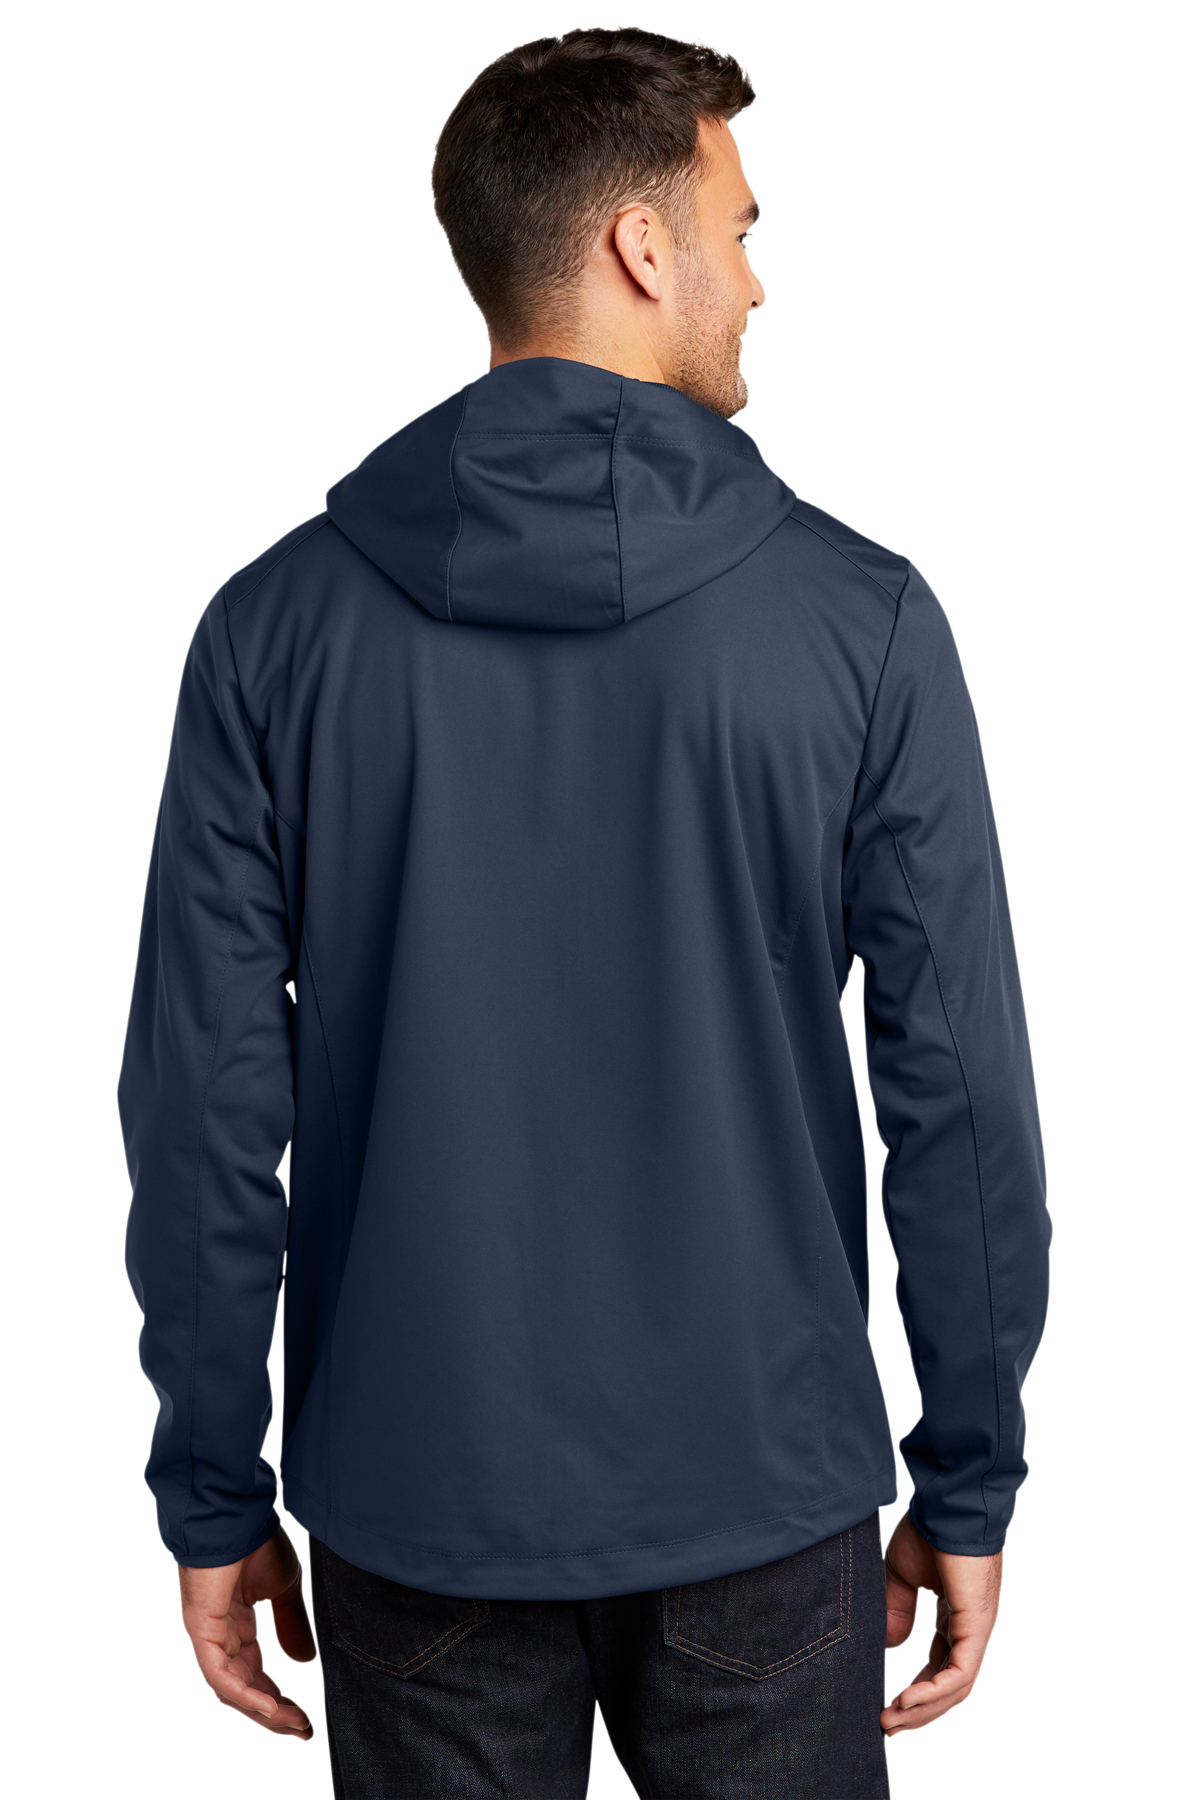 Port Authority Active Hooded Soft Shell Jacket | Product | Port Authority